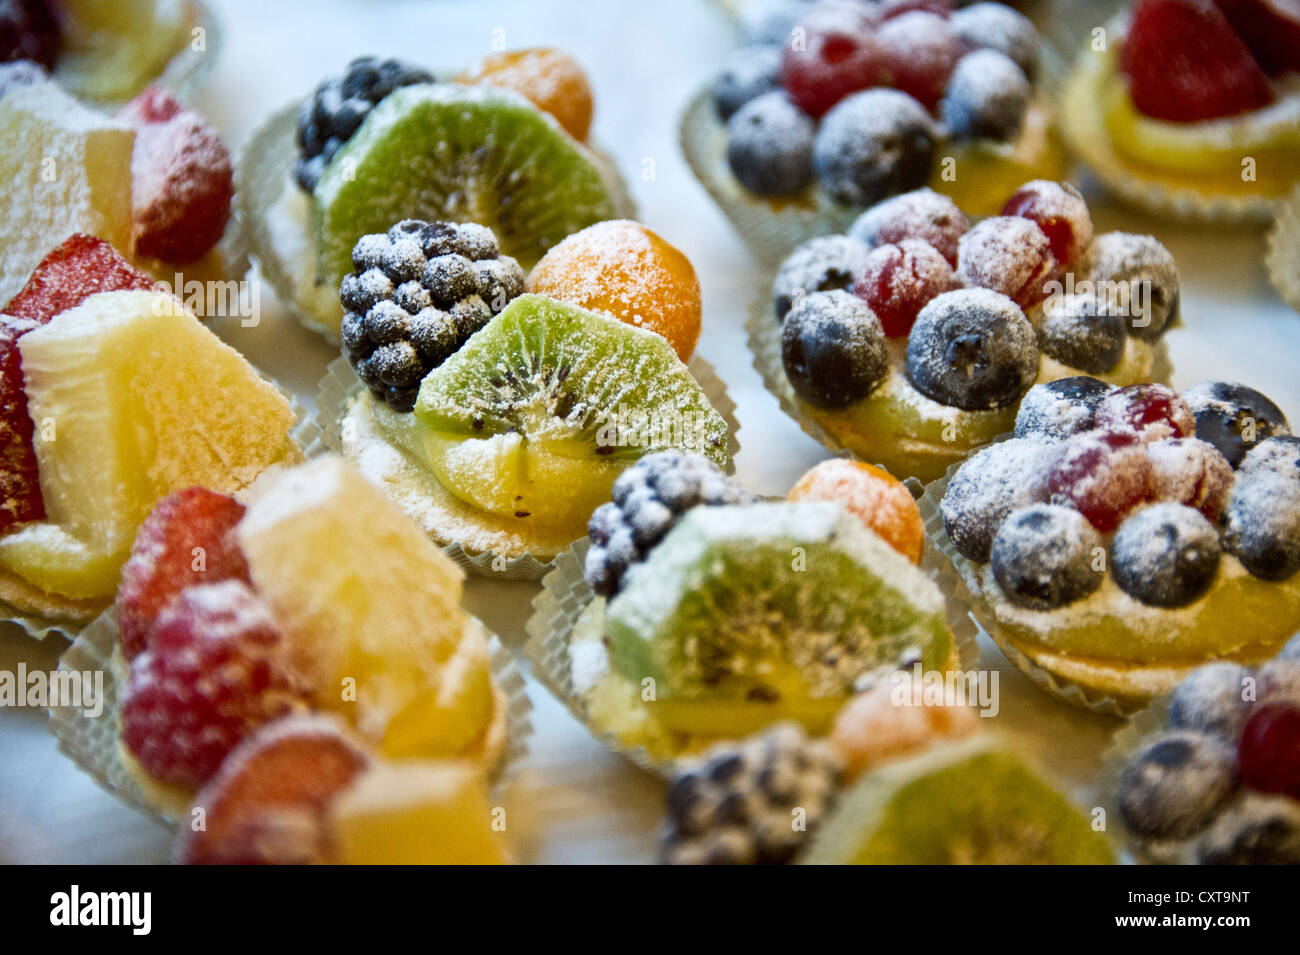 Small tartlets with fruits at a Pasticceria, cake shop, Rome, Lazio region, Italy, Europe Stock Photo